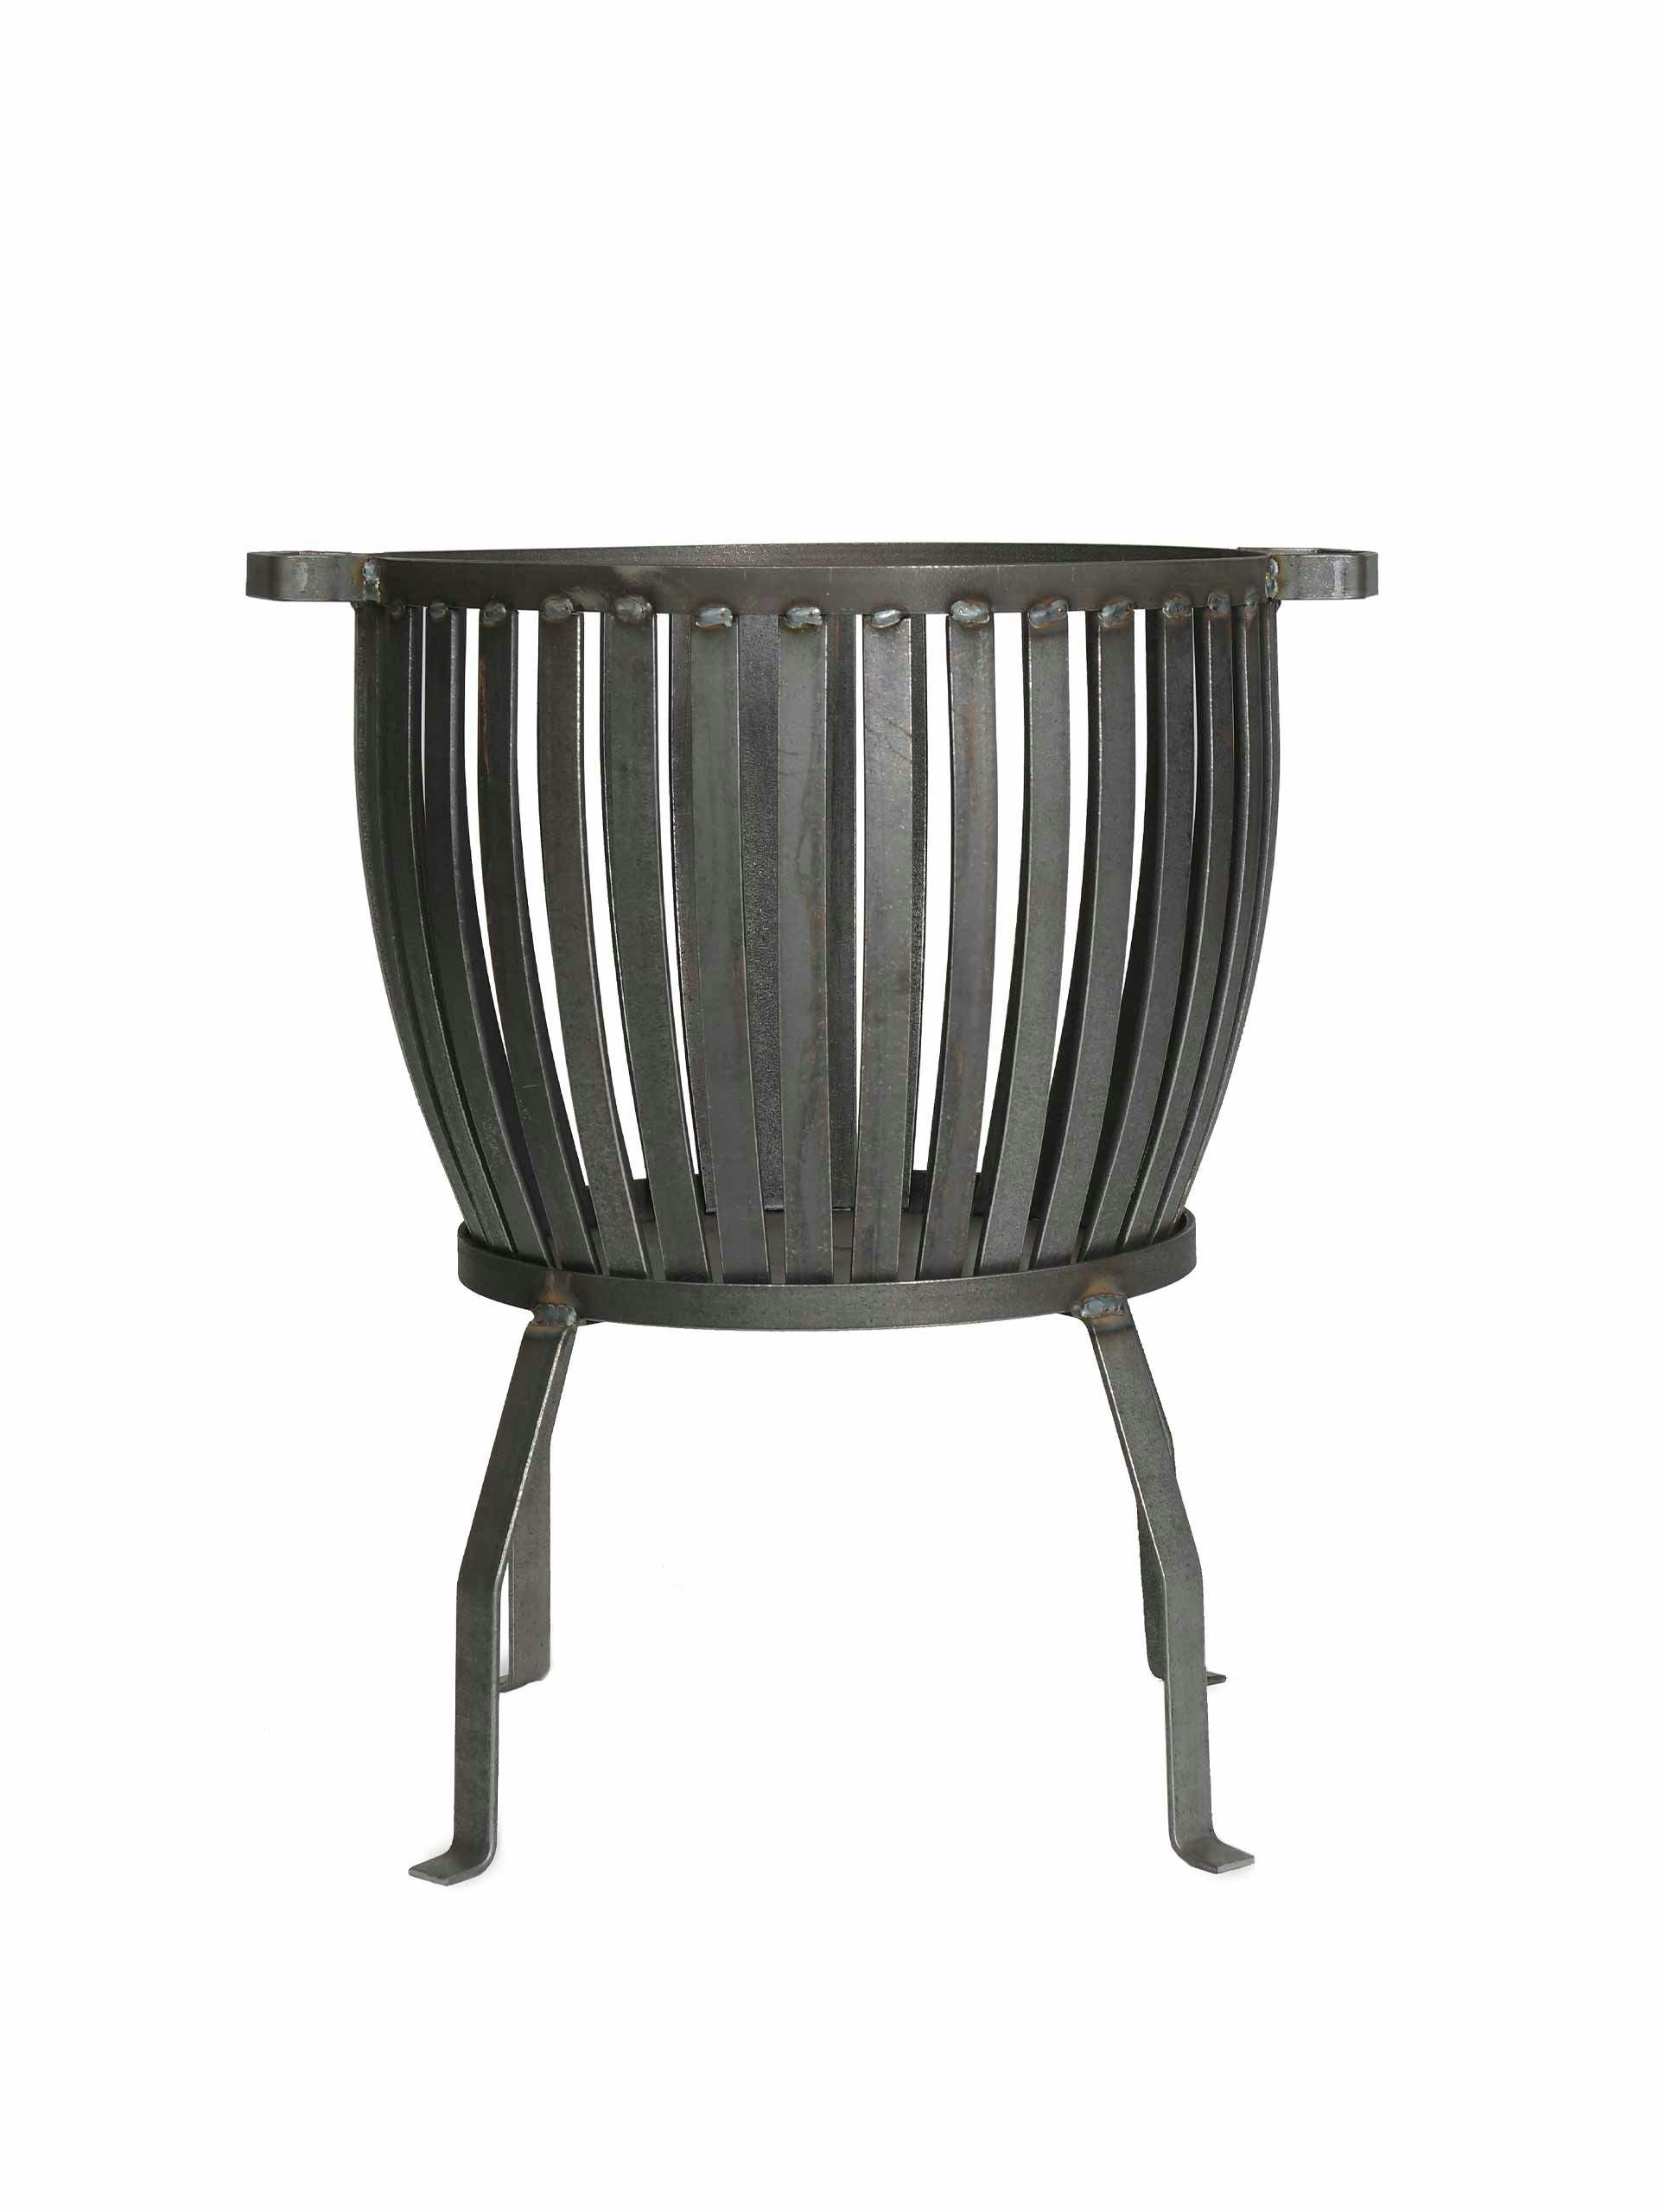 Industrial style fire pit